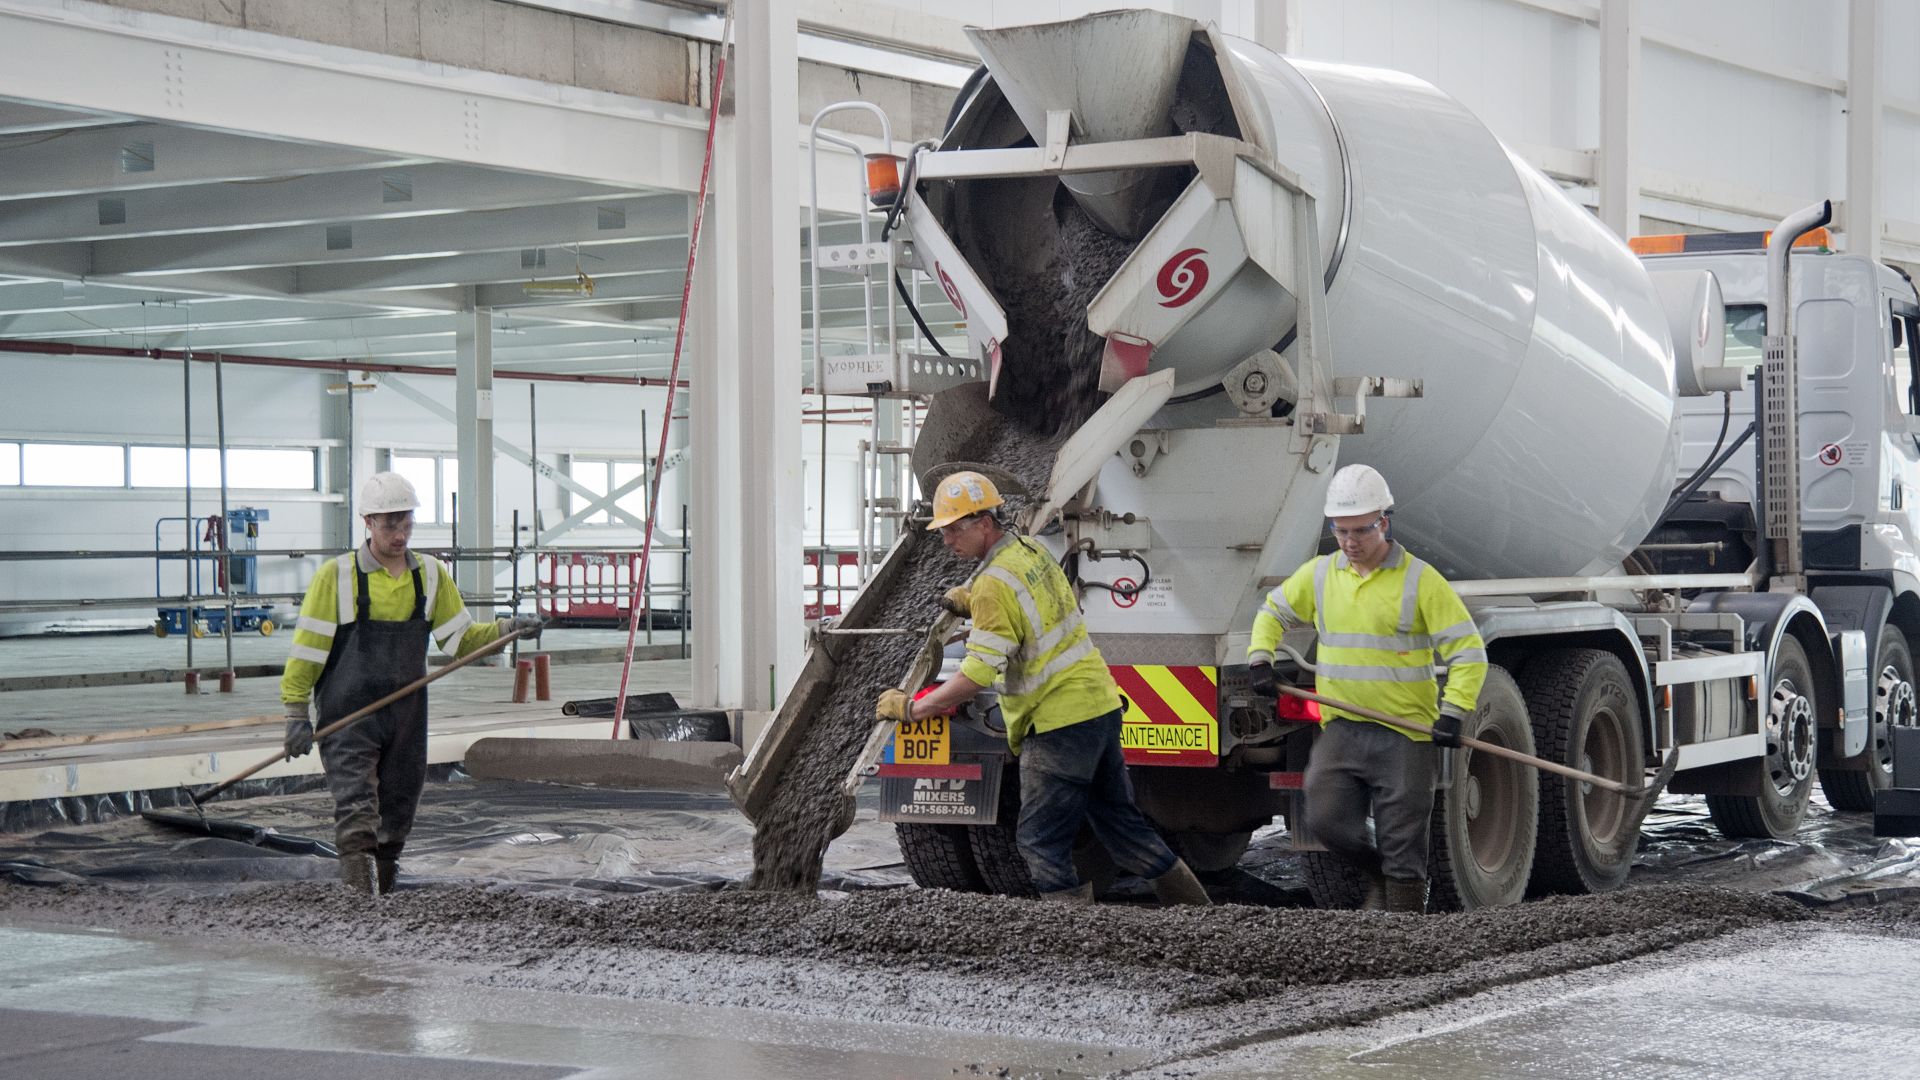 Workers pouring concrete from truck for concrete slab flooring with fibers